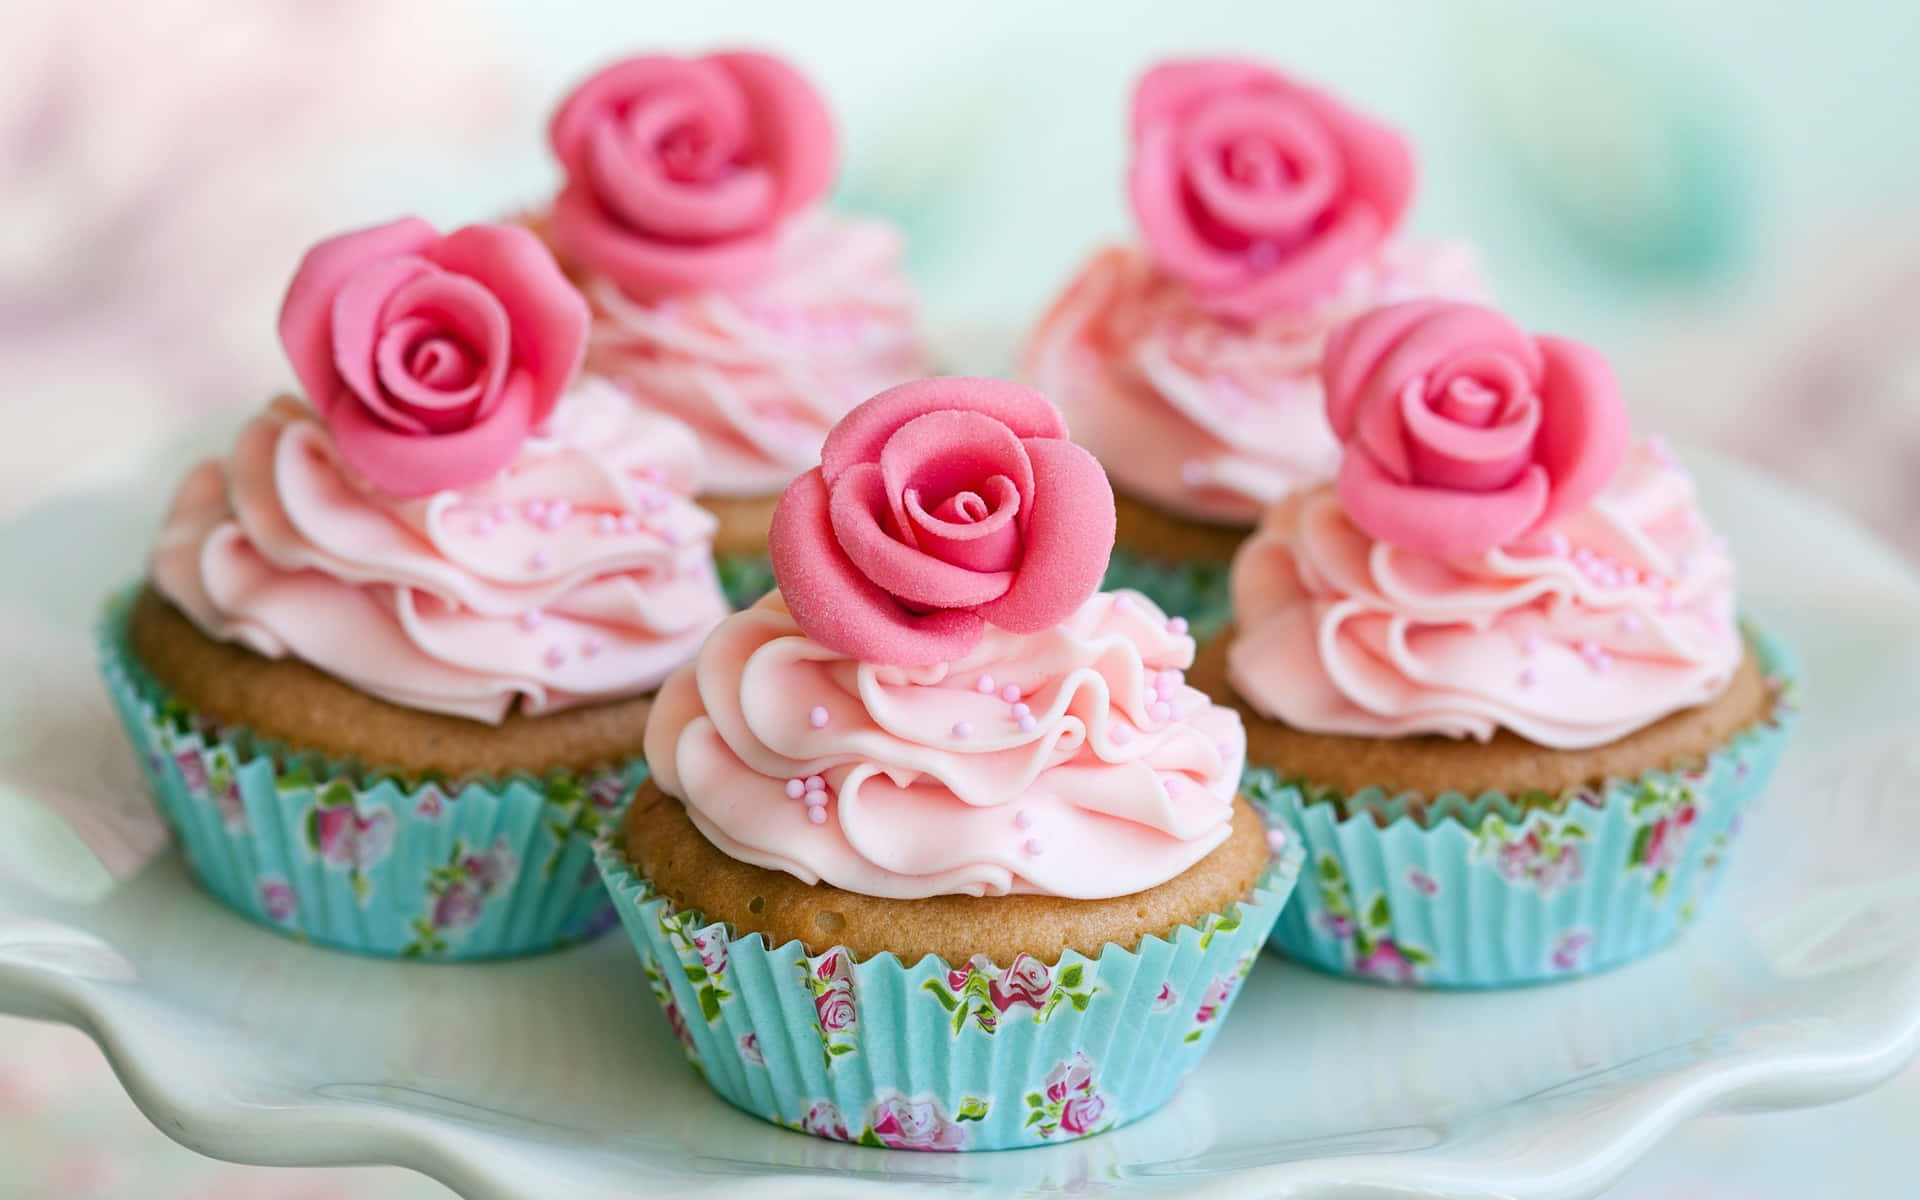 Adorable Cupcake with Cherry on Top Wallpaper